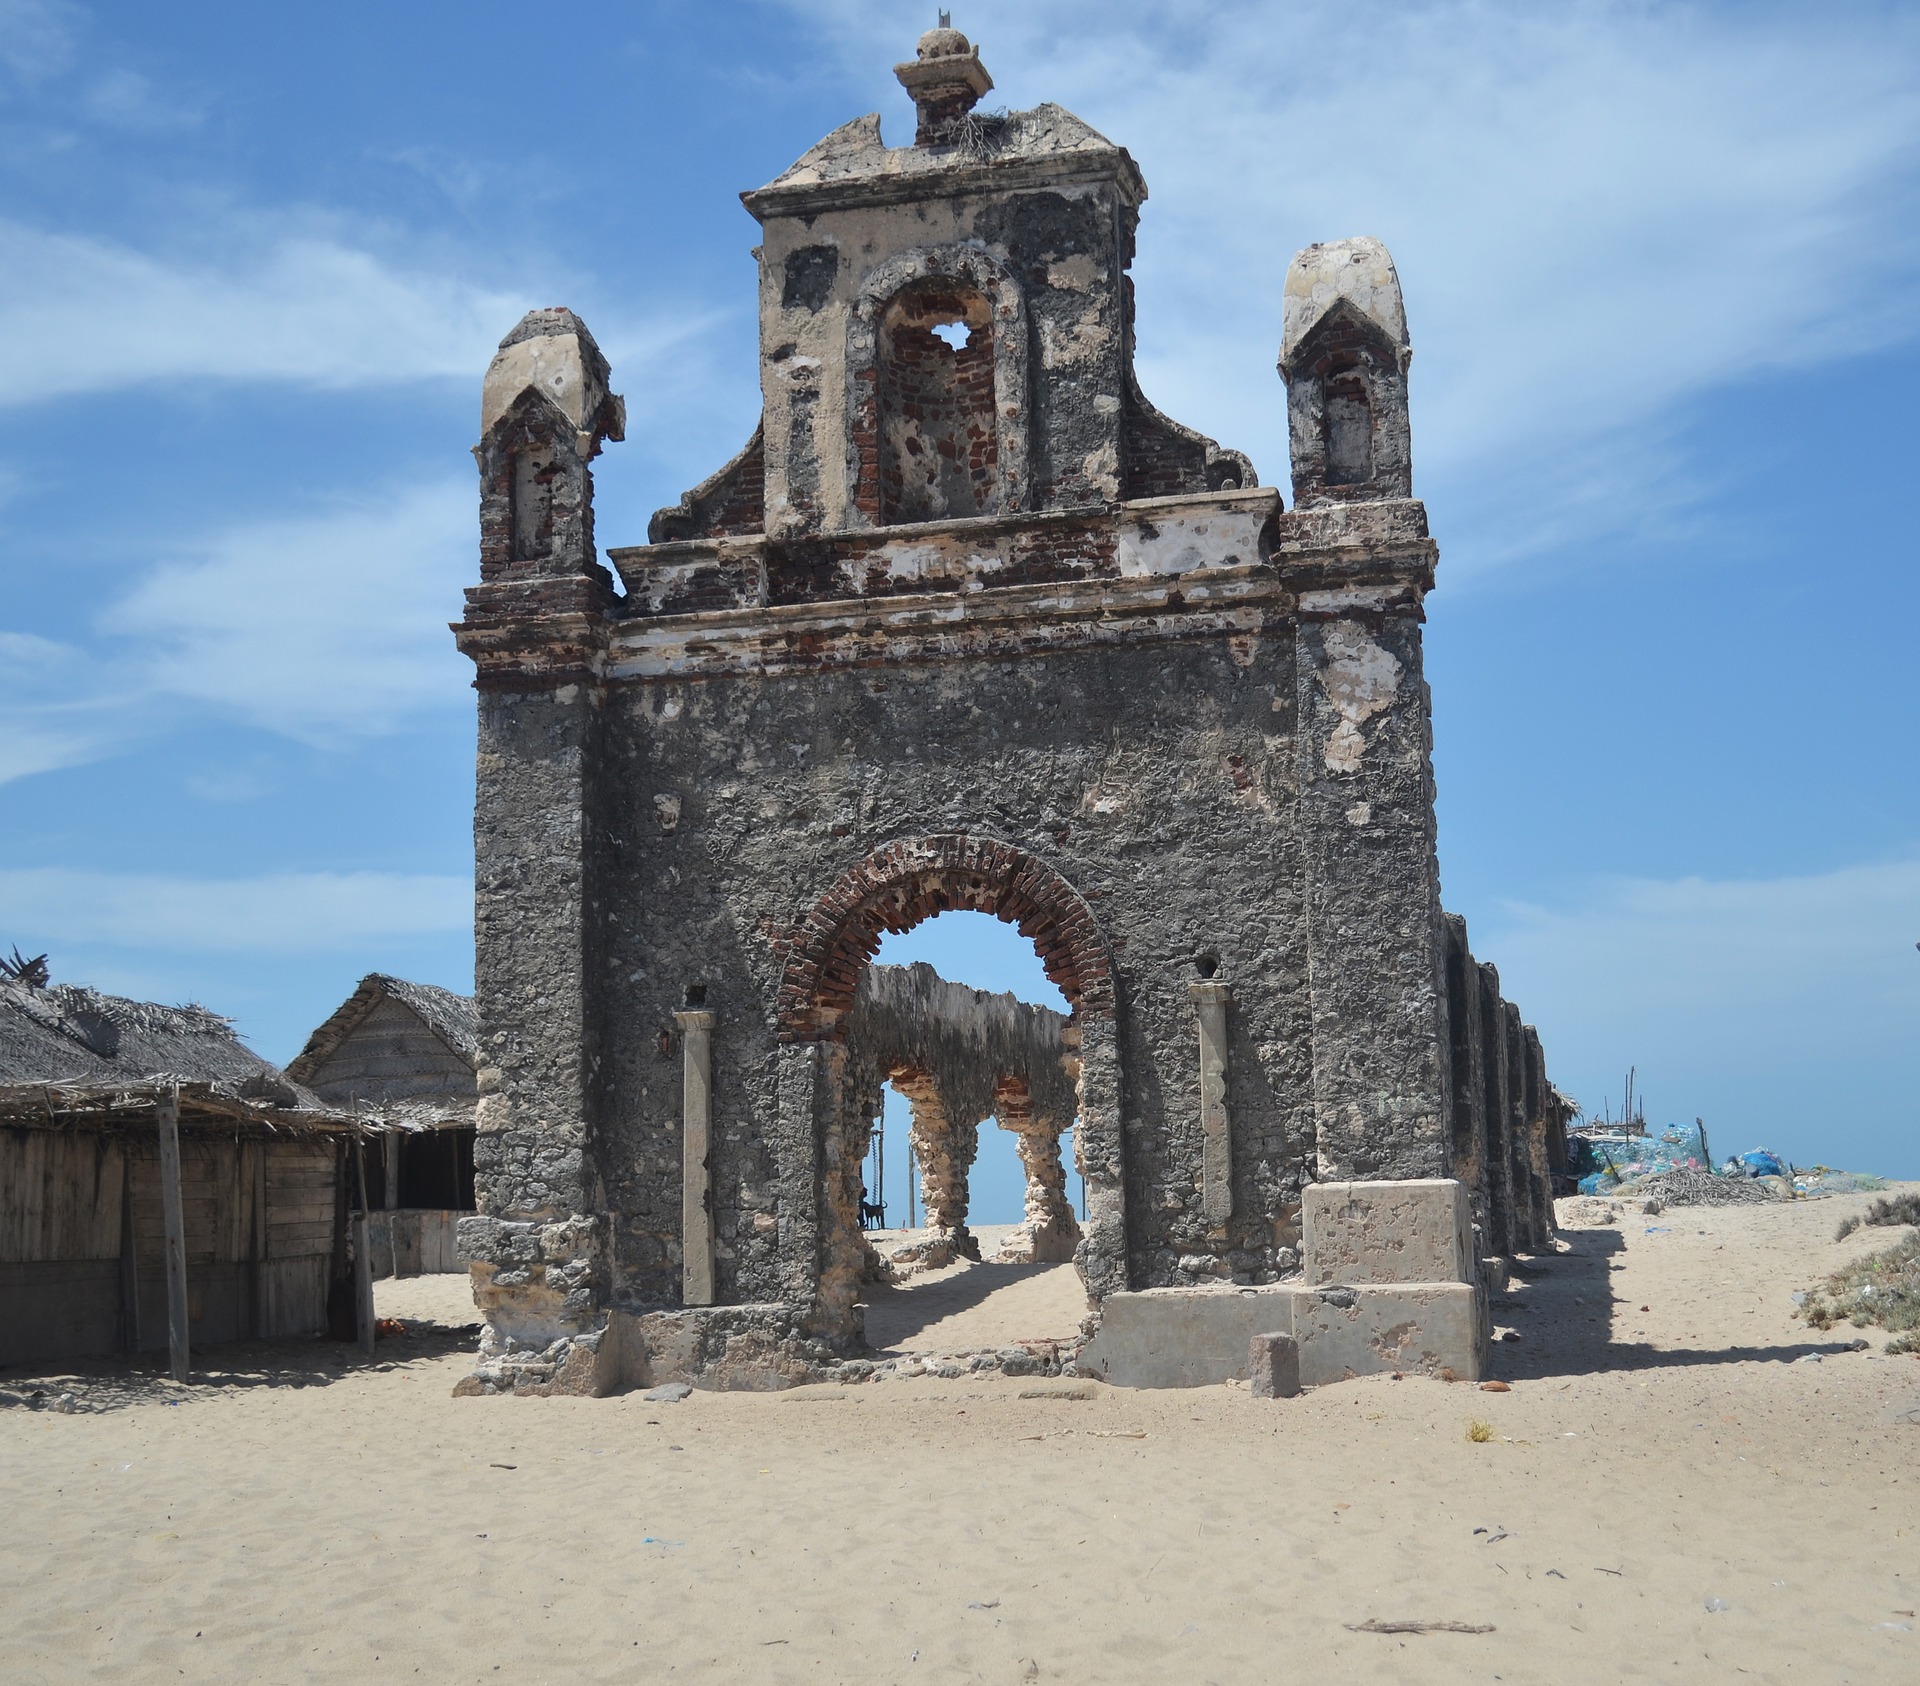 Head to Dhanushkodi for your New Year's Eve getaway